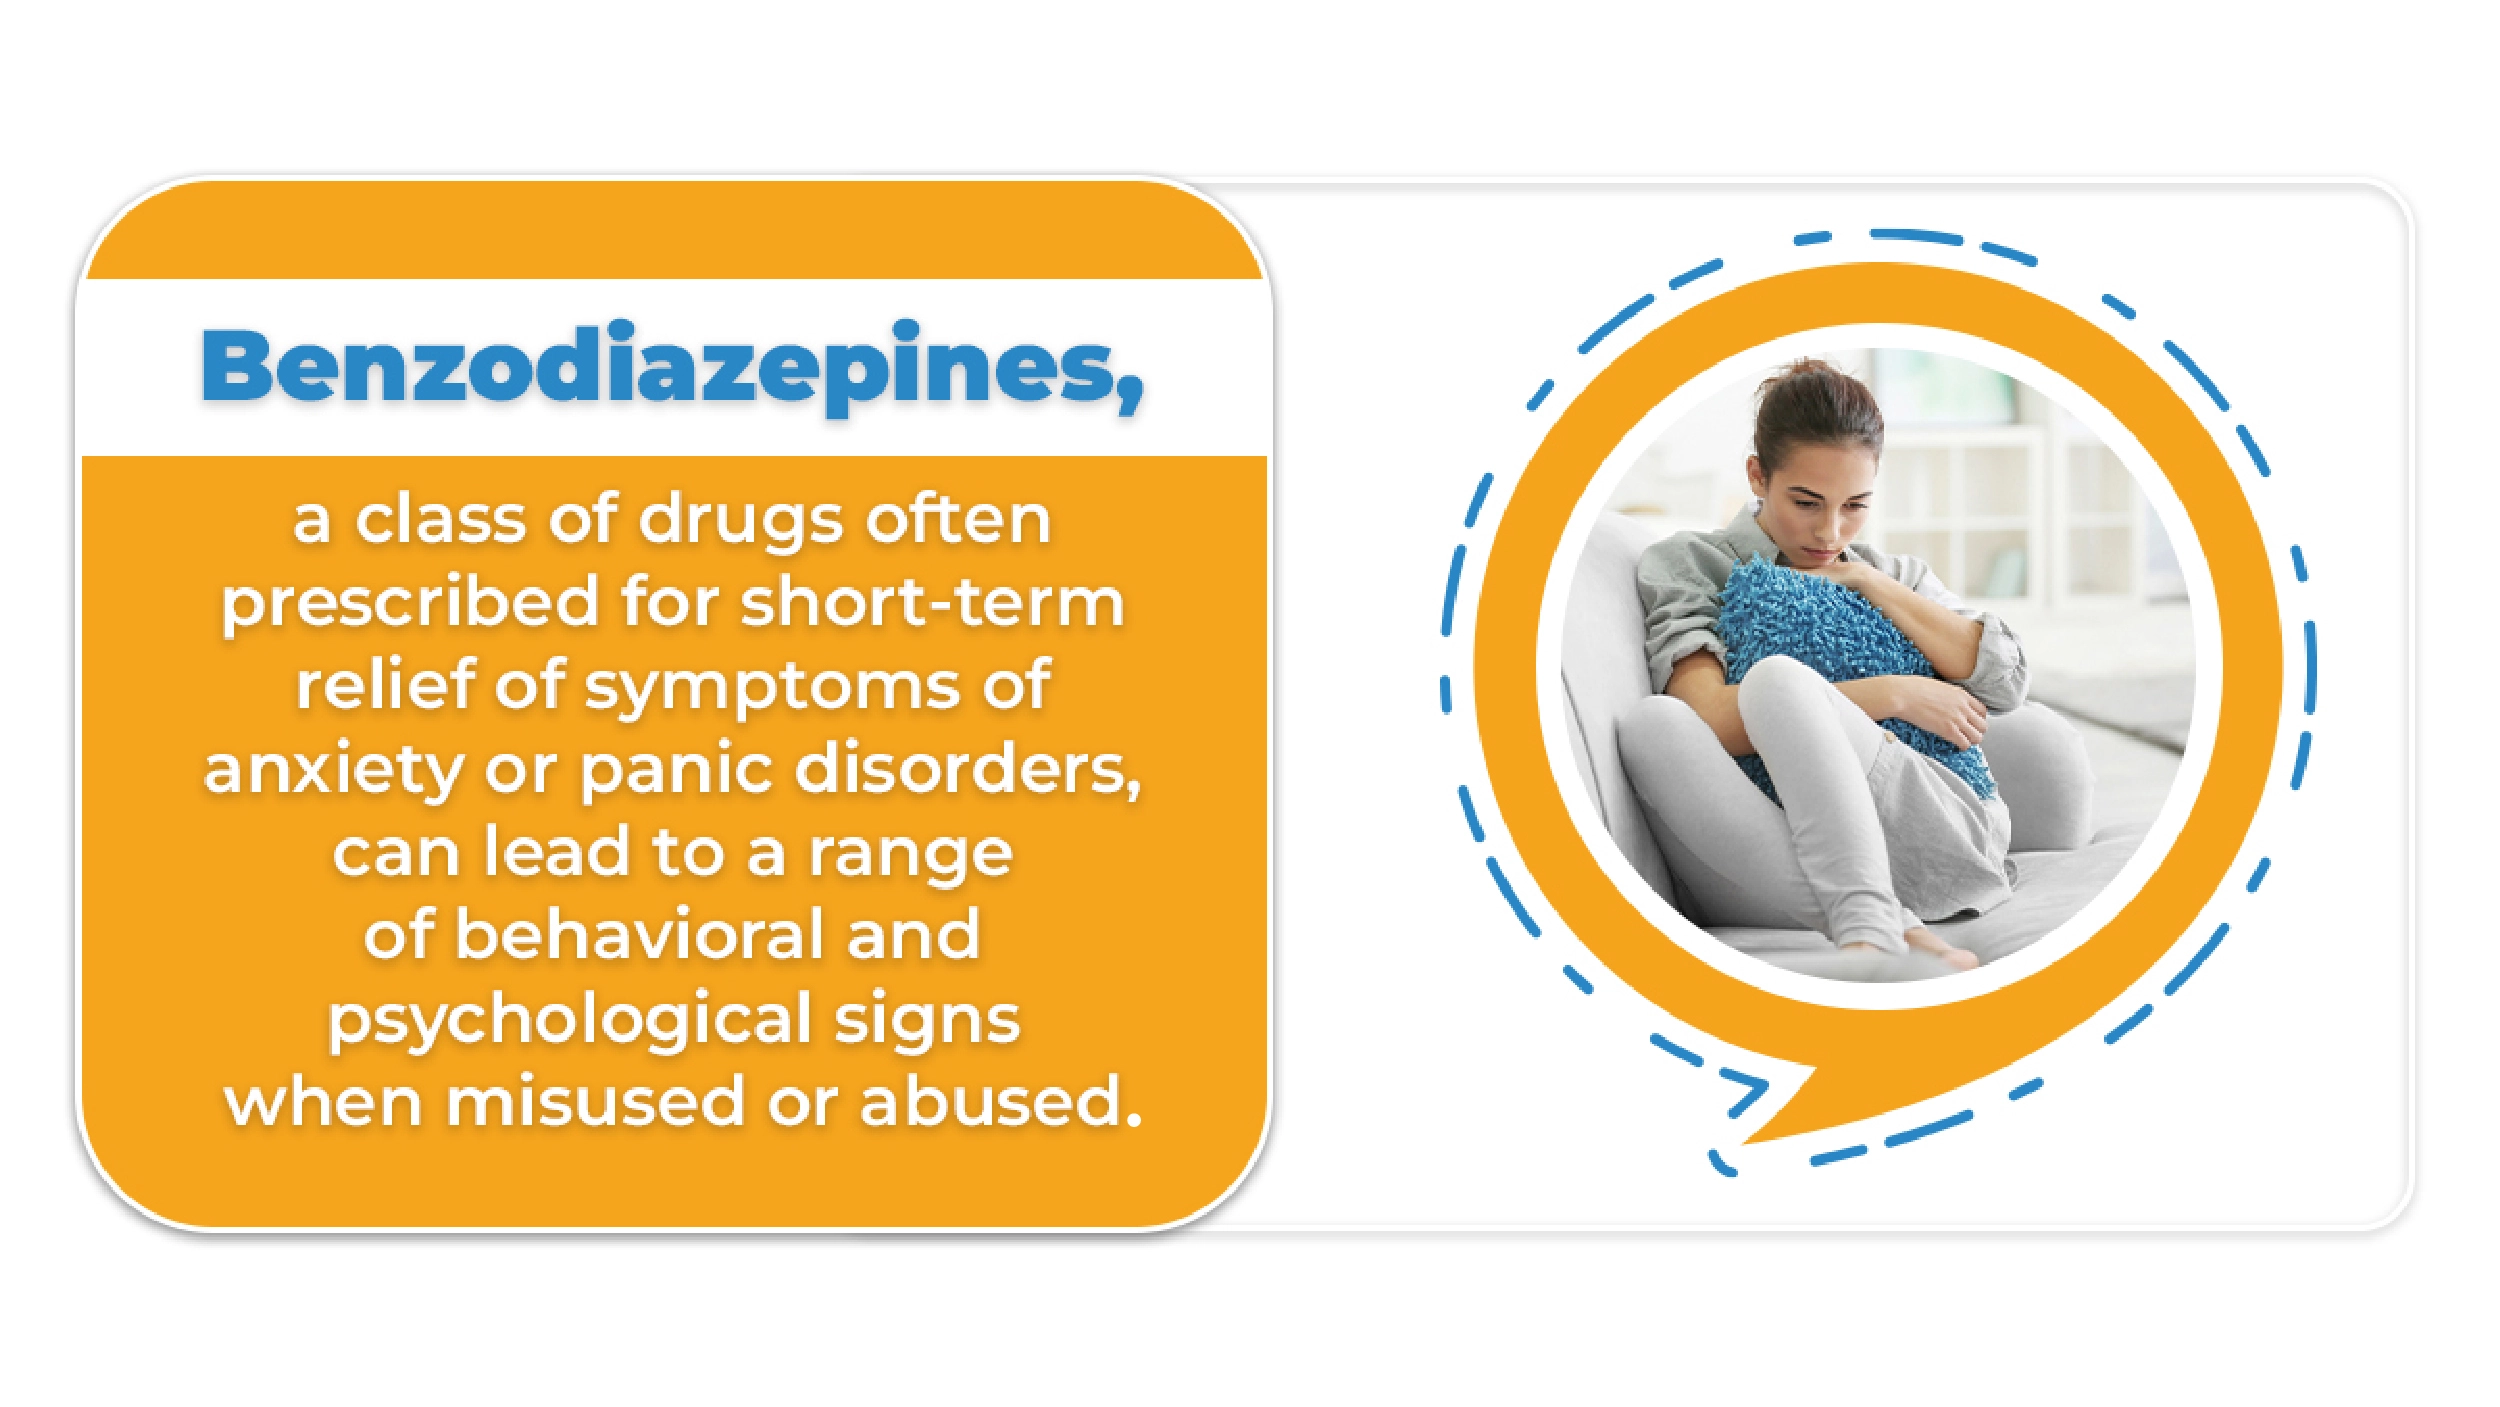 Visual representation of benzodiazepine pills illustrating their uses and the potential for addiction.